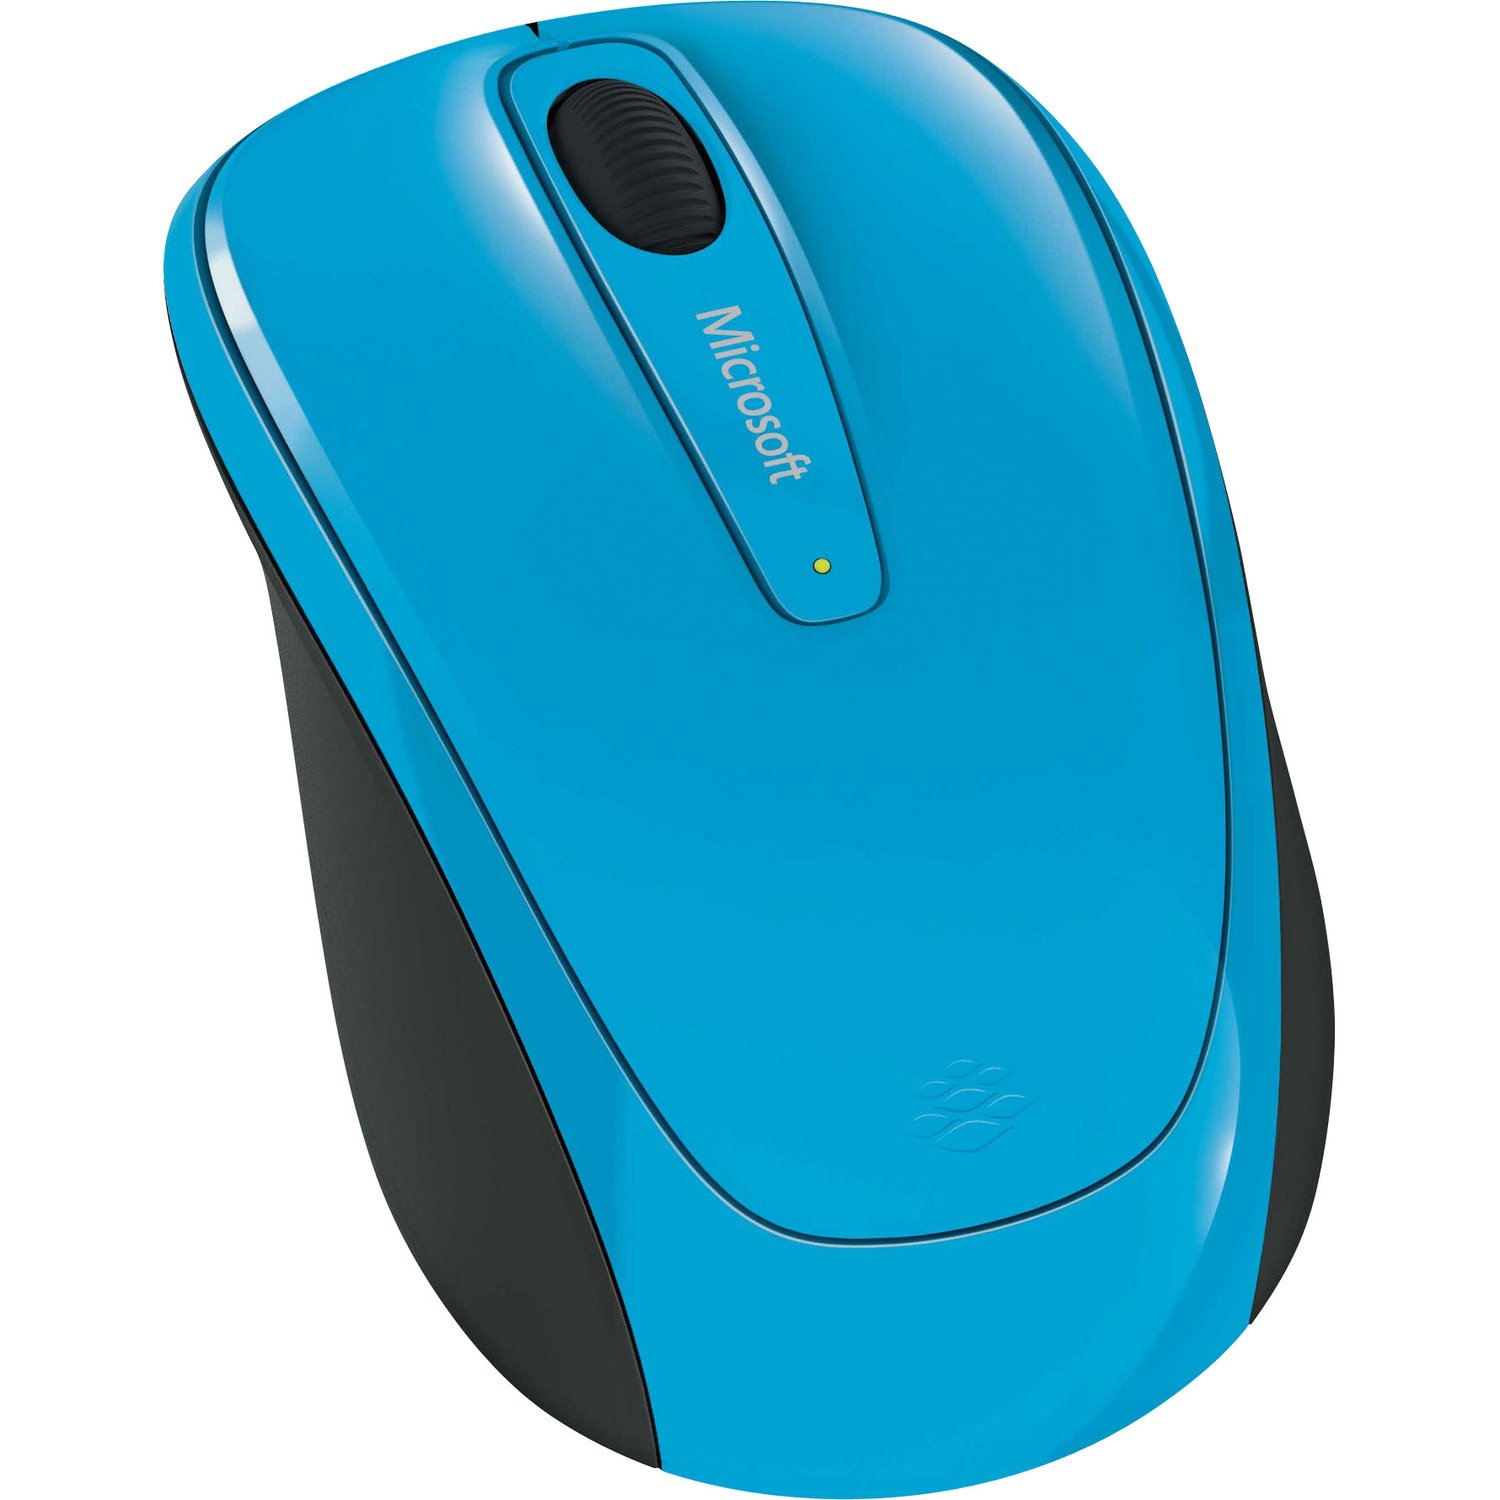 Microsoft Wireless Mobile 3500 Mouse - Radio Frequency - USB 2.0 - BlueTrack - 3 Button(s) - Cyan Blue